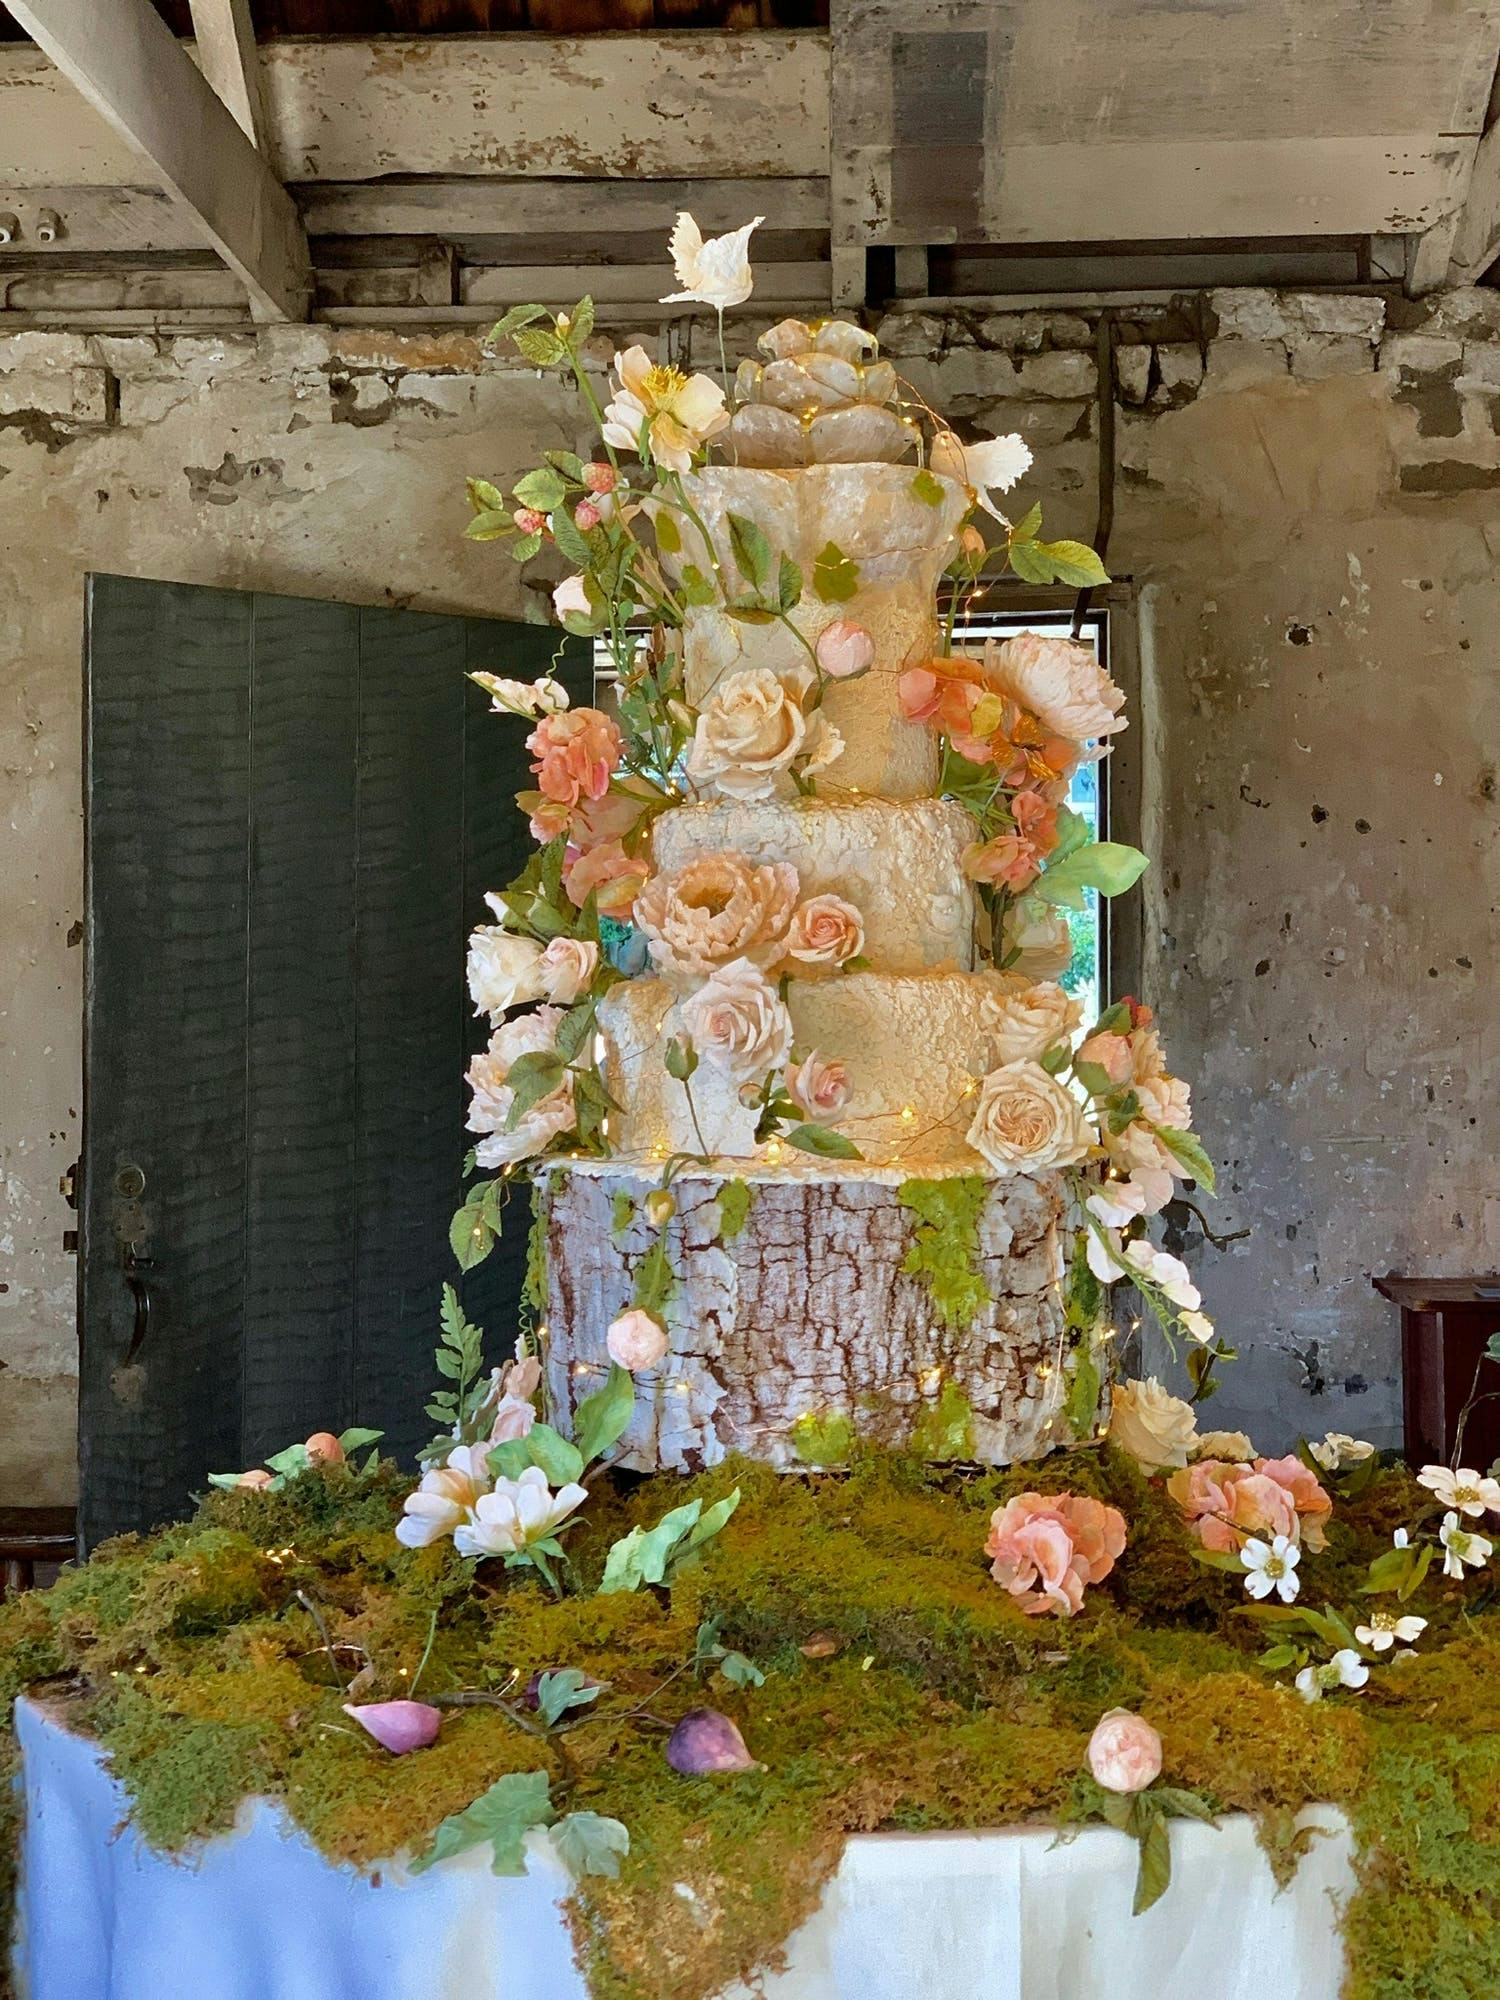 Large wedding cake on tree-trunk base and bed of moss with tiers covered in nature-like floral designs | PartySlate